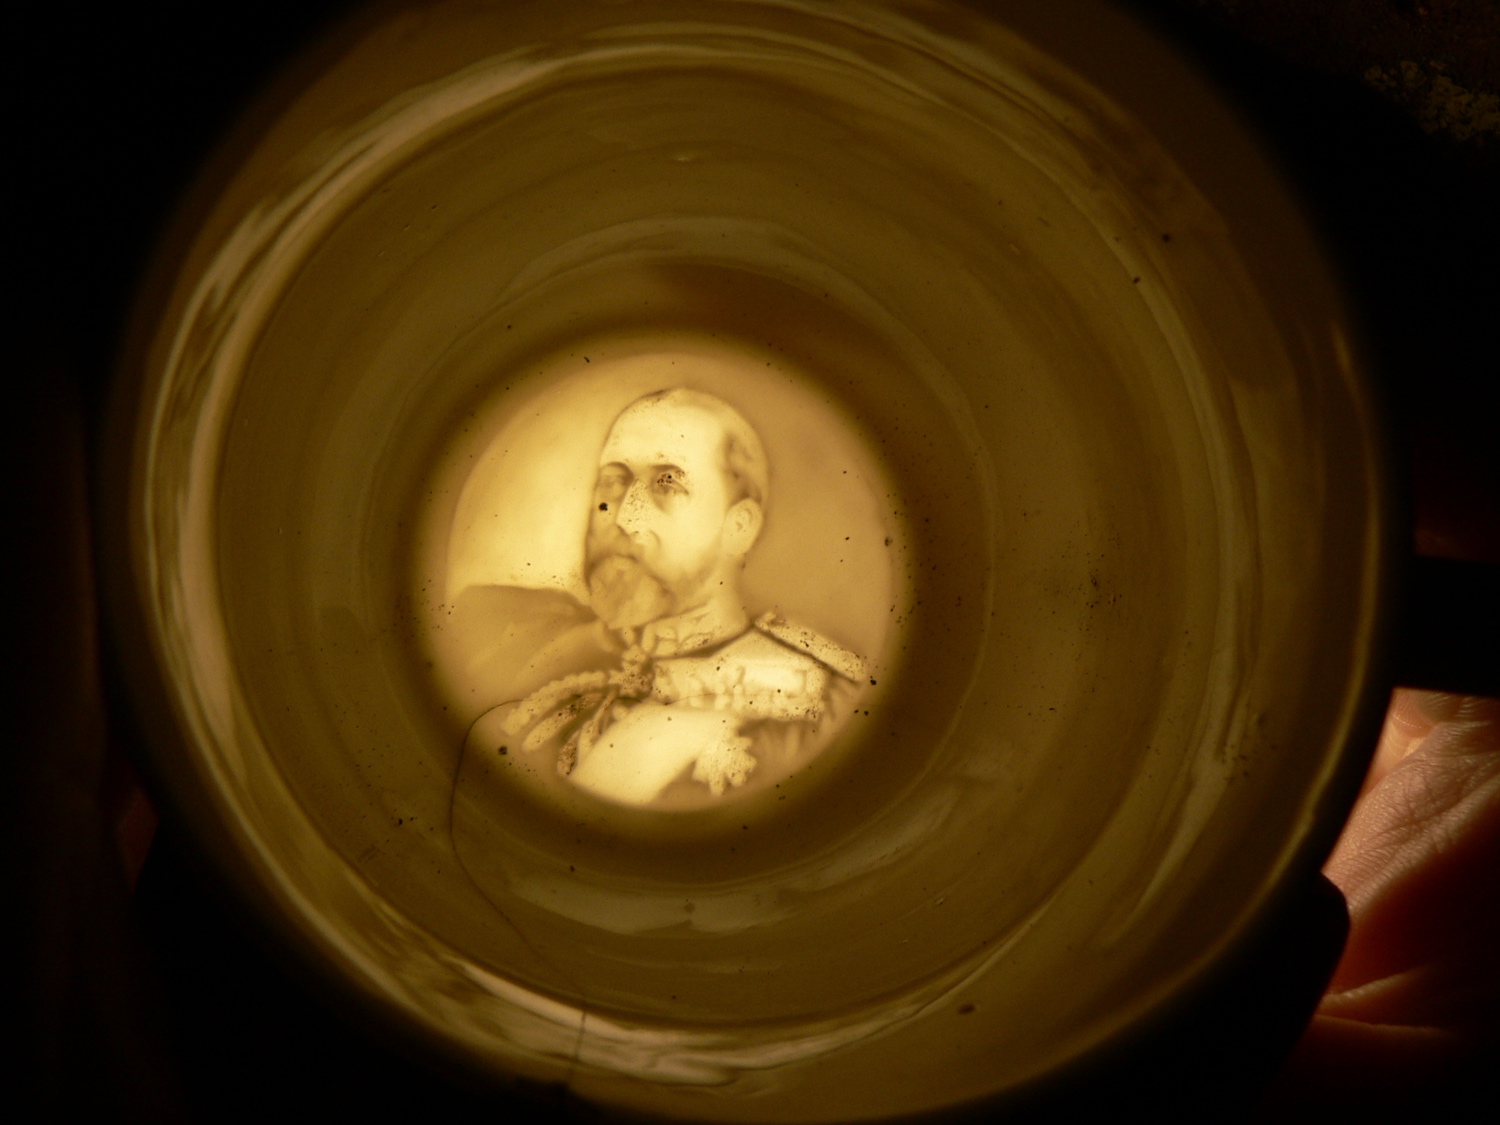 Photograph of translucent image of Edward VII in base of teacup